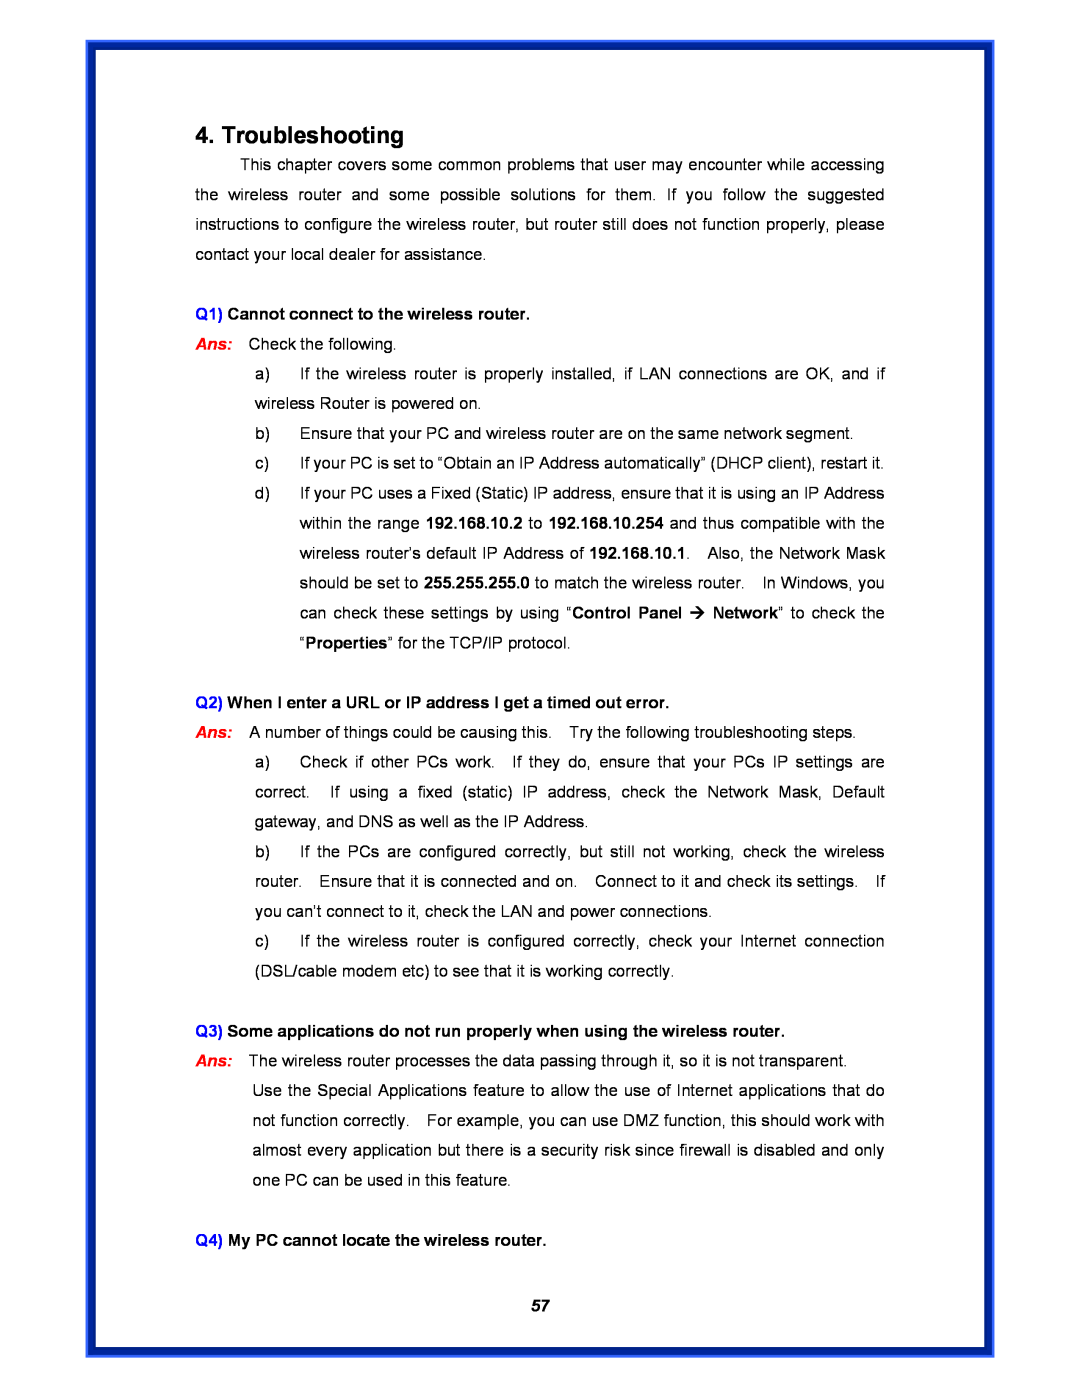 Advantek Networks AWR-MIMO-54RA user manual Troubleshooting, Q1 Cannot connect to the wireless router 